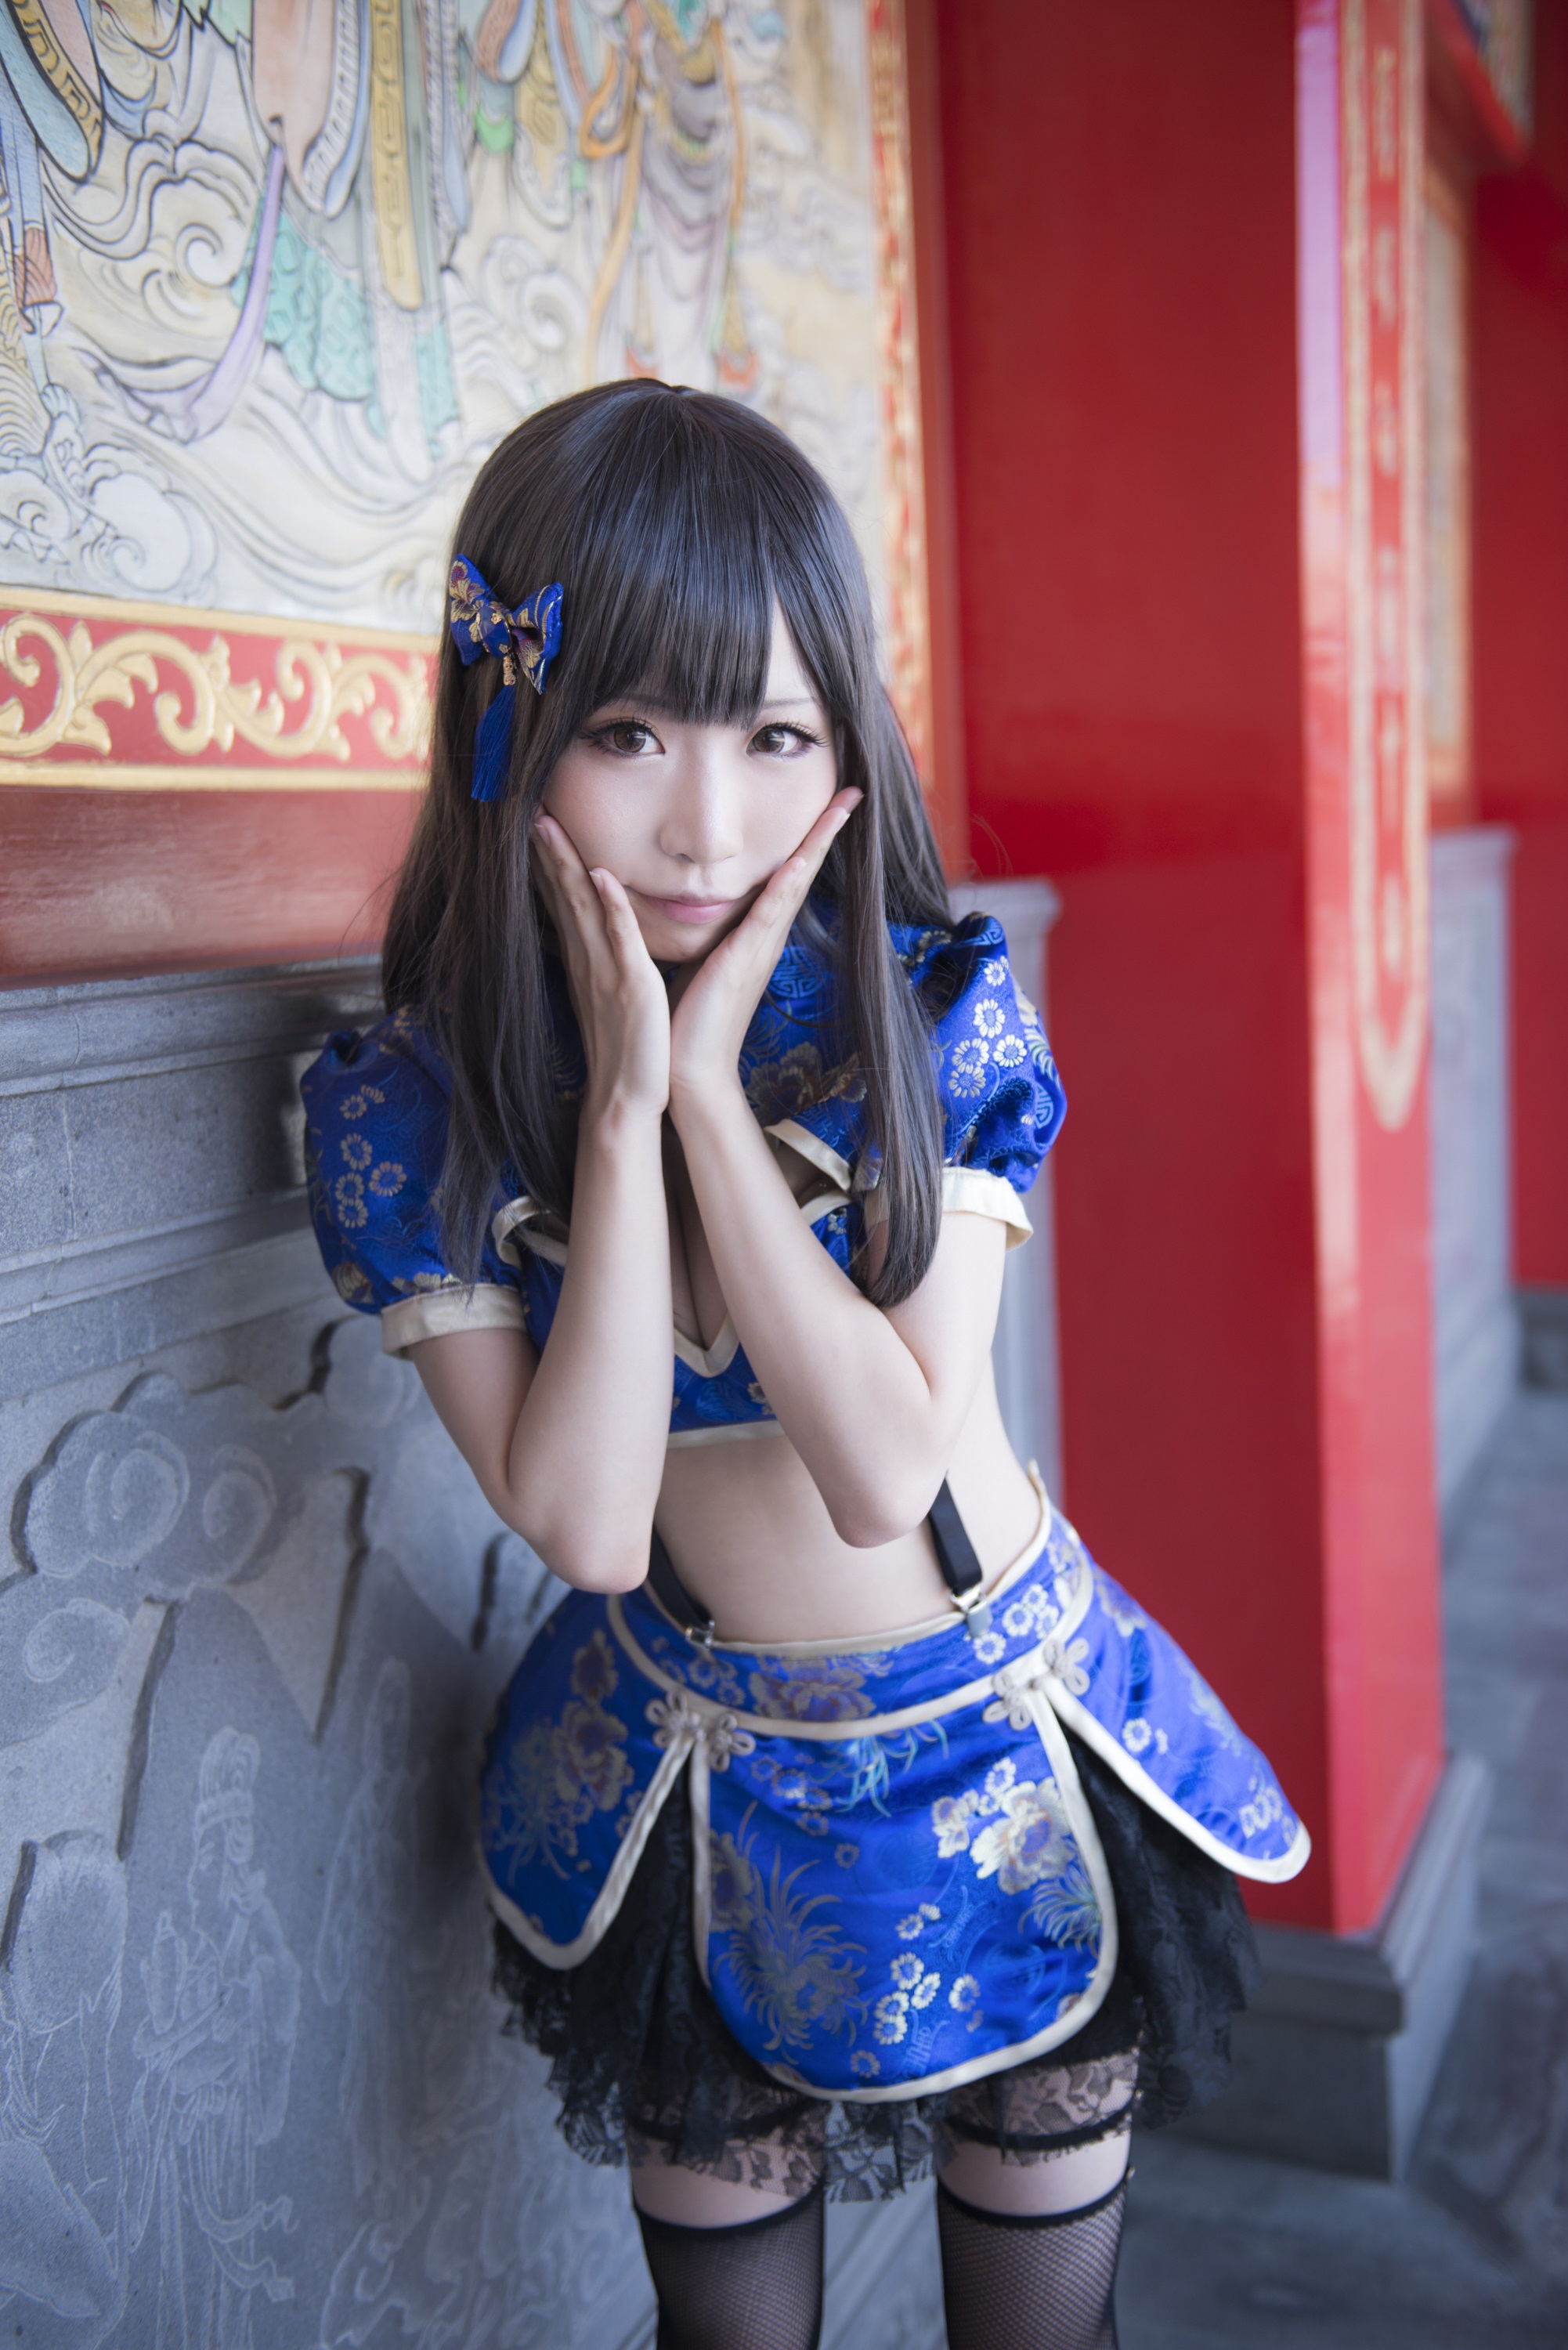 Japanese Women Women Asian Cosplay Women Outdoors Fleia Looking At Viewer Cleavage 